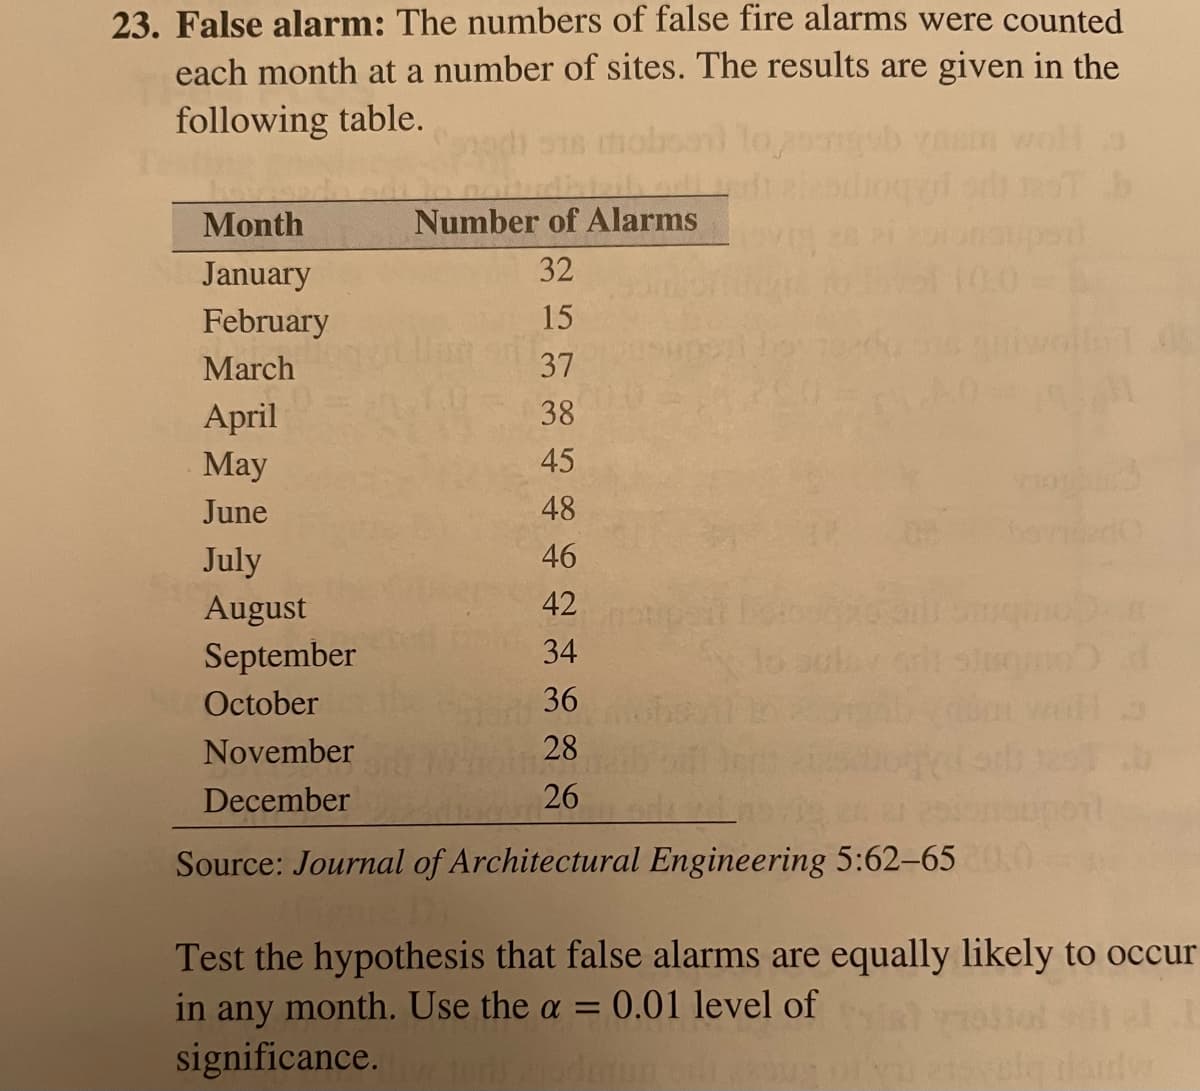 23. False alarm: The numbers of false fire alarms were counted
each month at a number of sites. The results are given in the
following table.
Month
January
February
March
April
May
June
July
August
September
October
November
December
Number of Alarms
32
15
37
38
45
48
46
42
34
36
28
1.20
26
Source: Journal of Architectural Engineering 5:62-65 20
Vo
40
Test the hypothesis that false alarms are equally likely to occur
in any month. Use the a = 0.01 level of
significance.